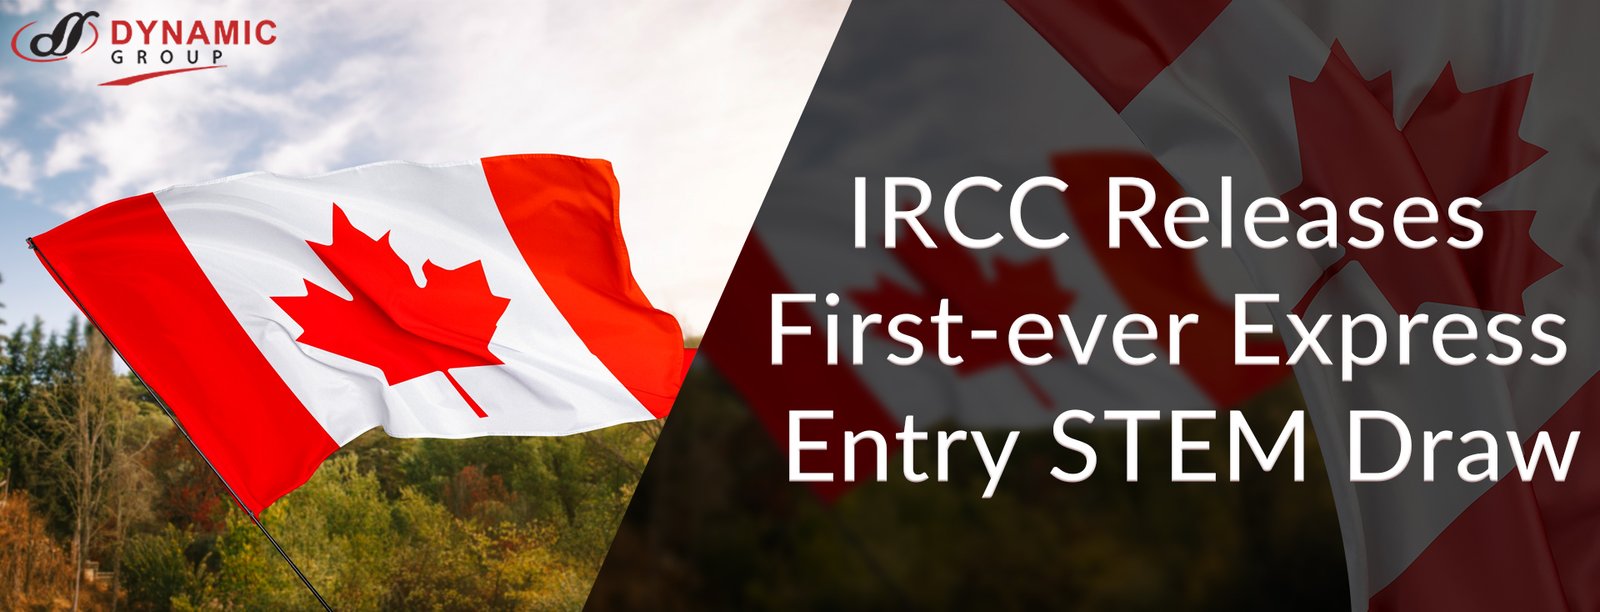 IRCC Releases Firstever Express Entry STEM Draw